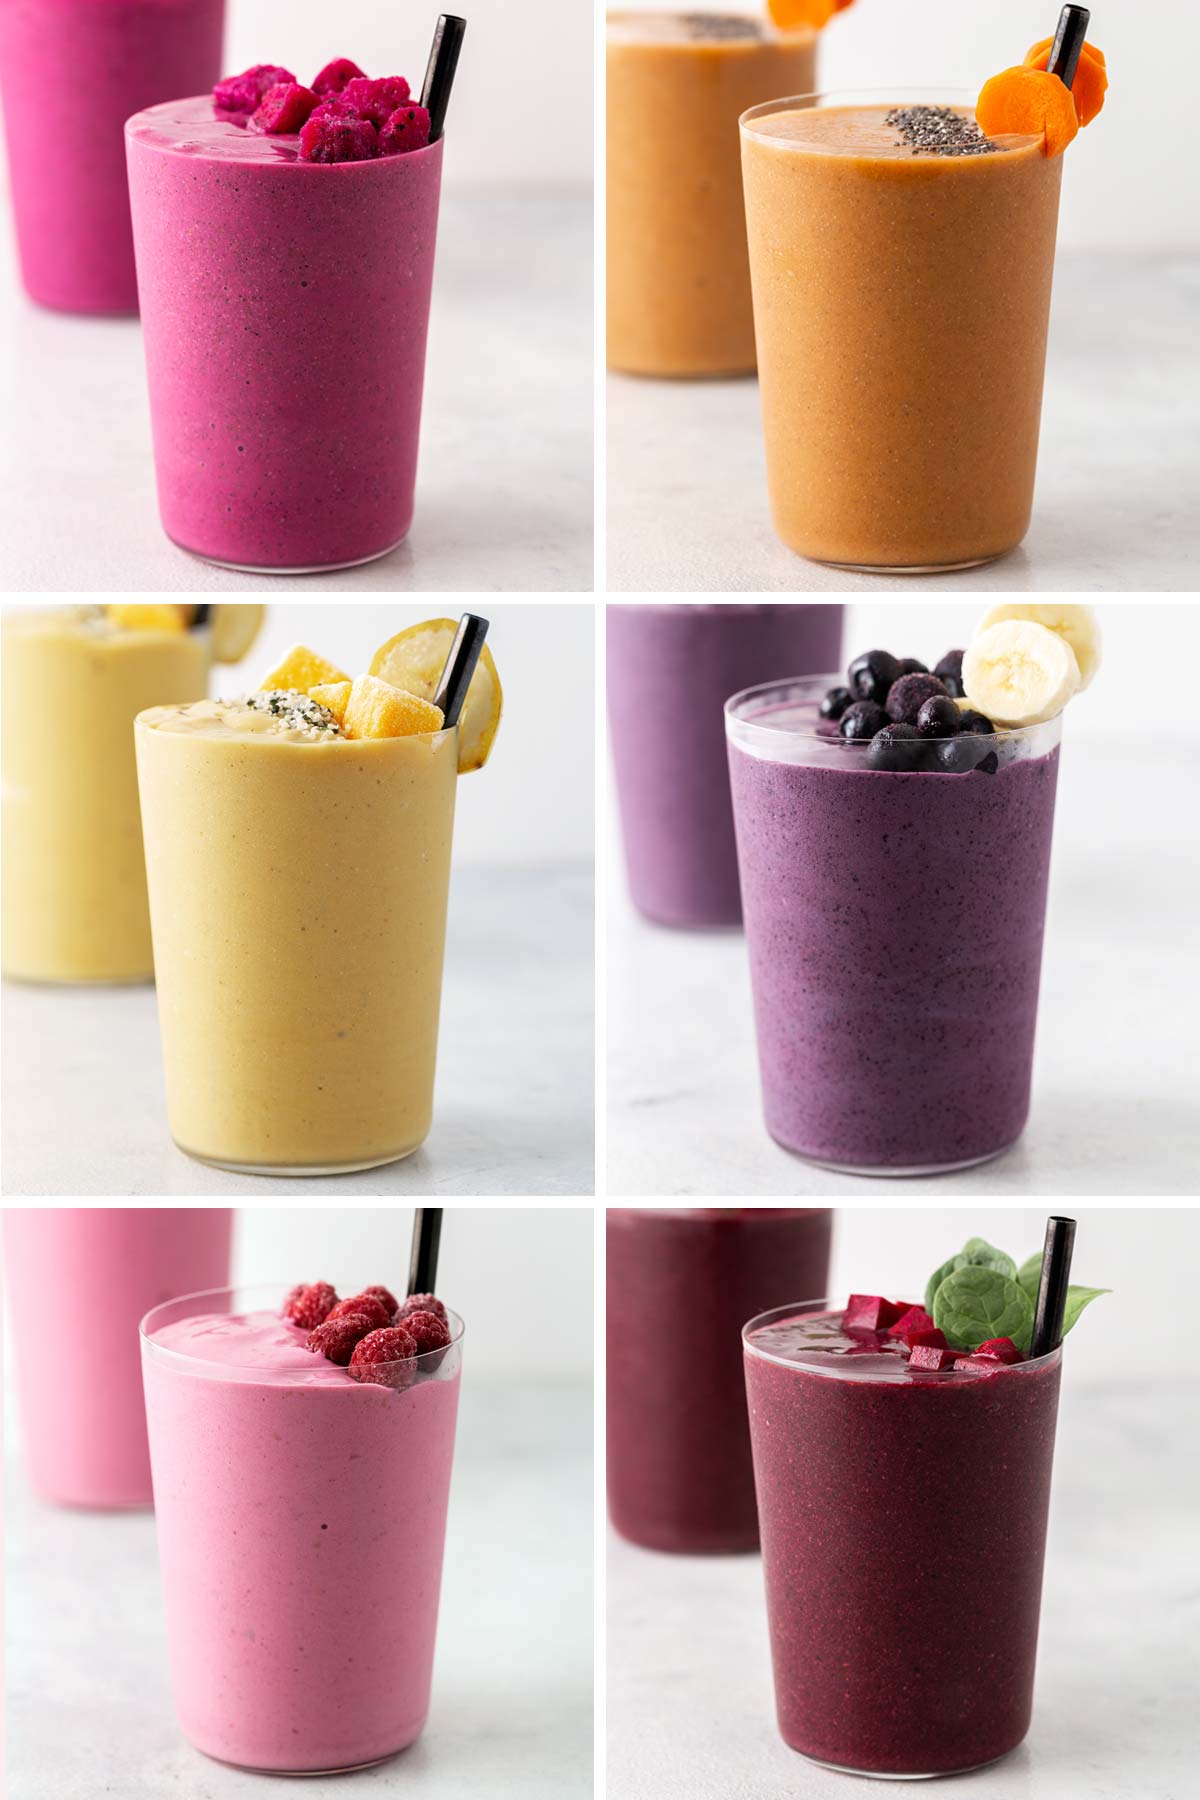 6 healthy and colorful smoothies in a box grid.